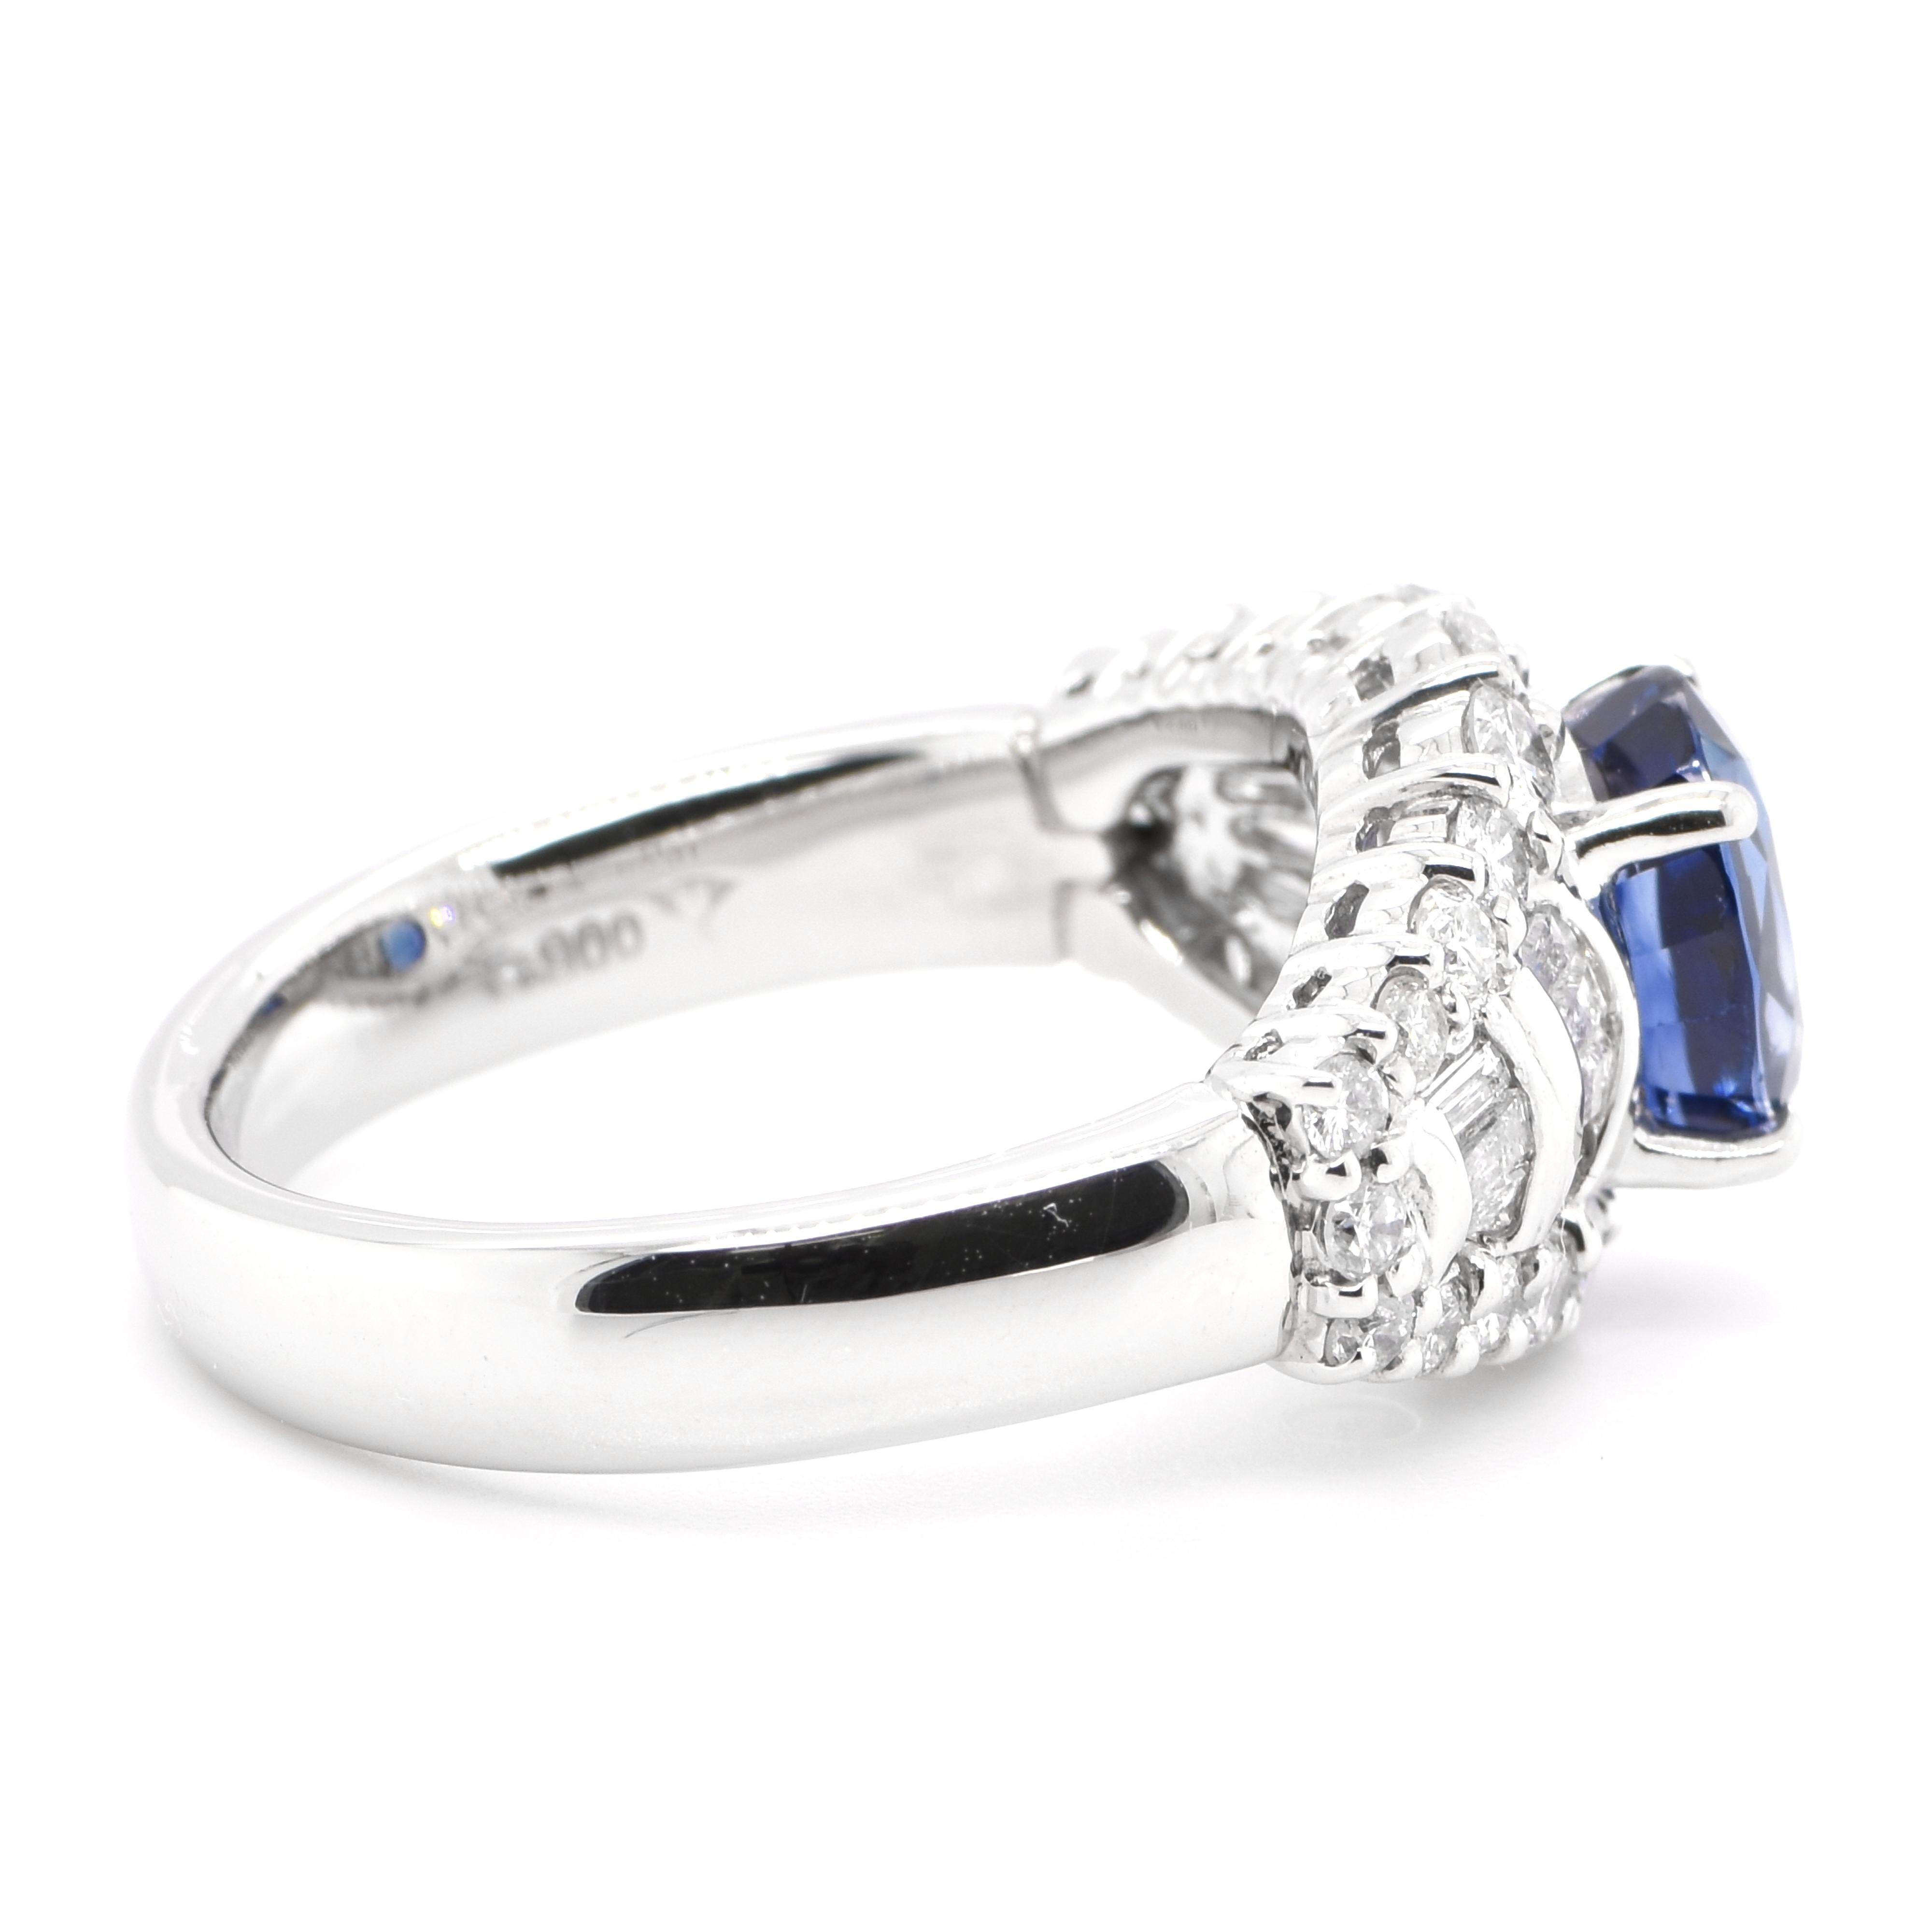 Women's 2.02 Carat Natural Sapphire and Diamond Art Deco Style Ring Set in Platinum